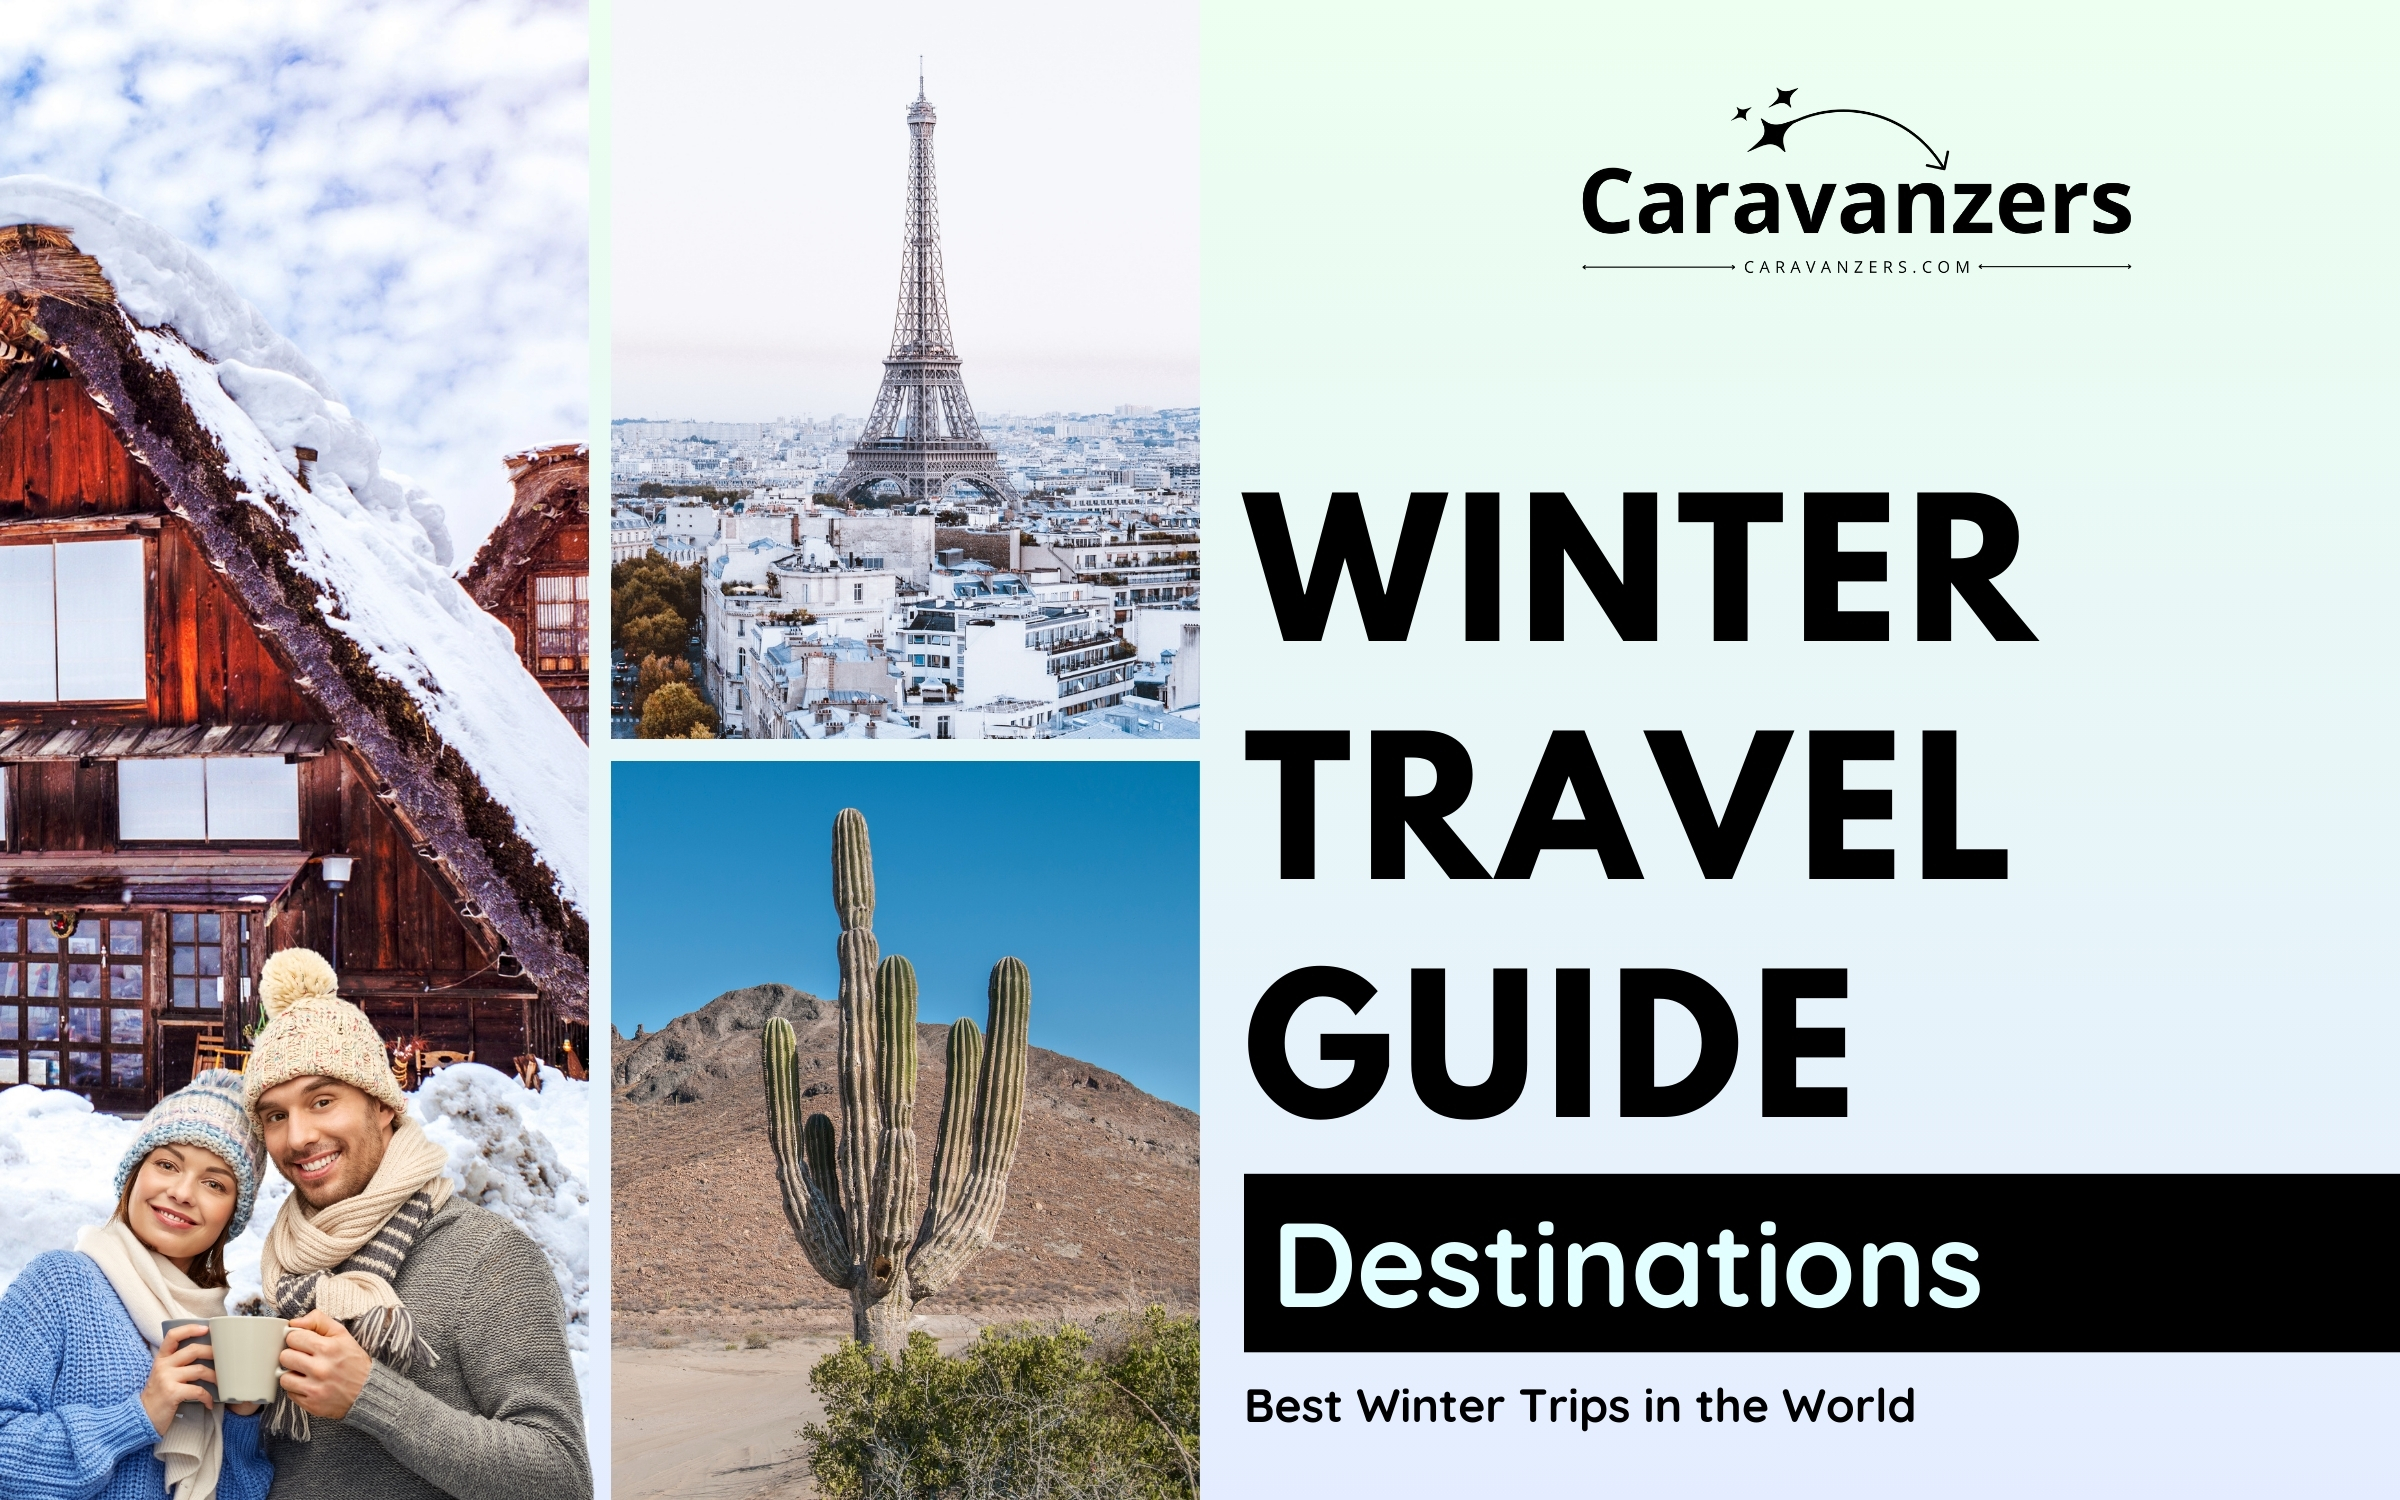 Winter Travel Destinations Are Truly Beautiful and Diverse